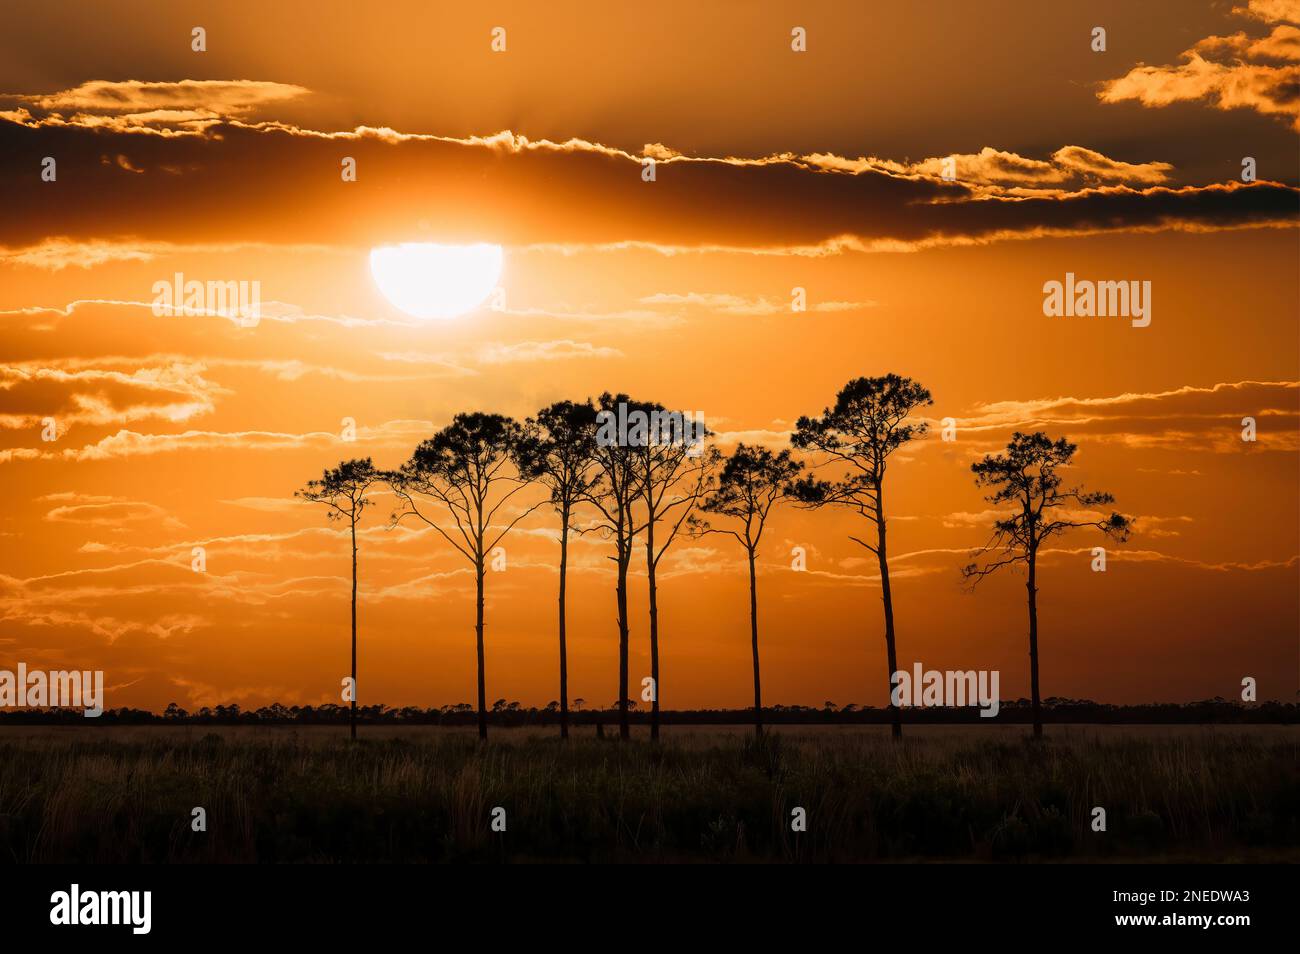 Pine trees silhouetted aganist an ornage  sunset sky in Southwestern Florida USA Stock Photo